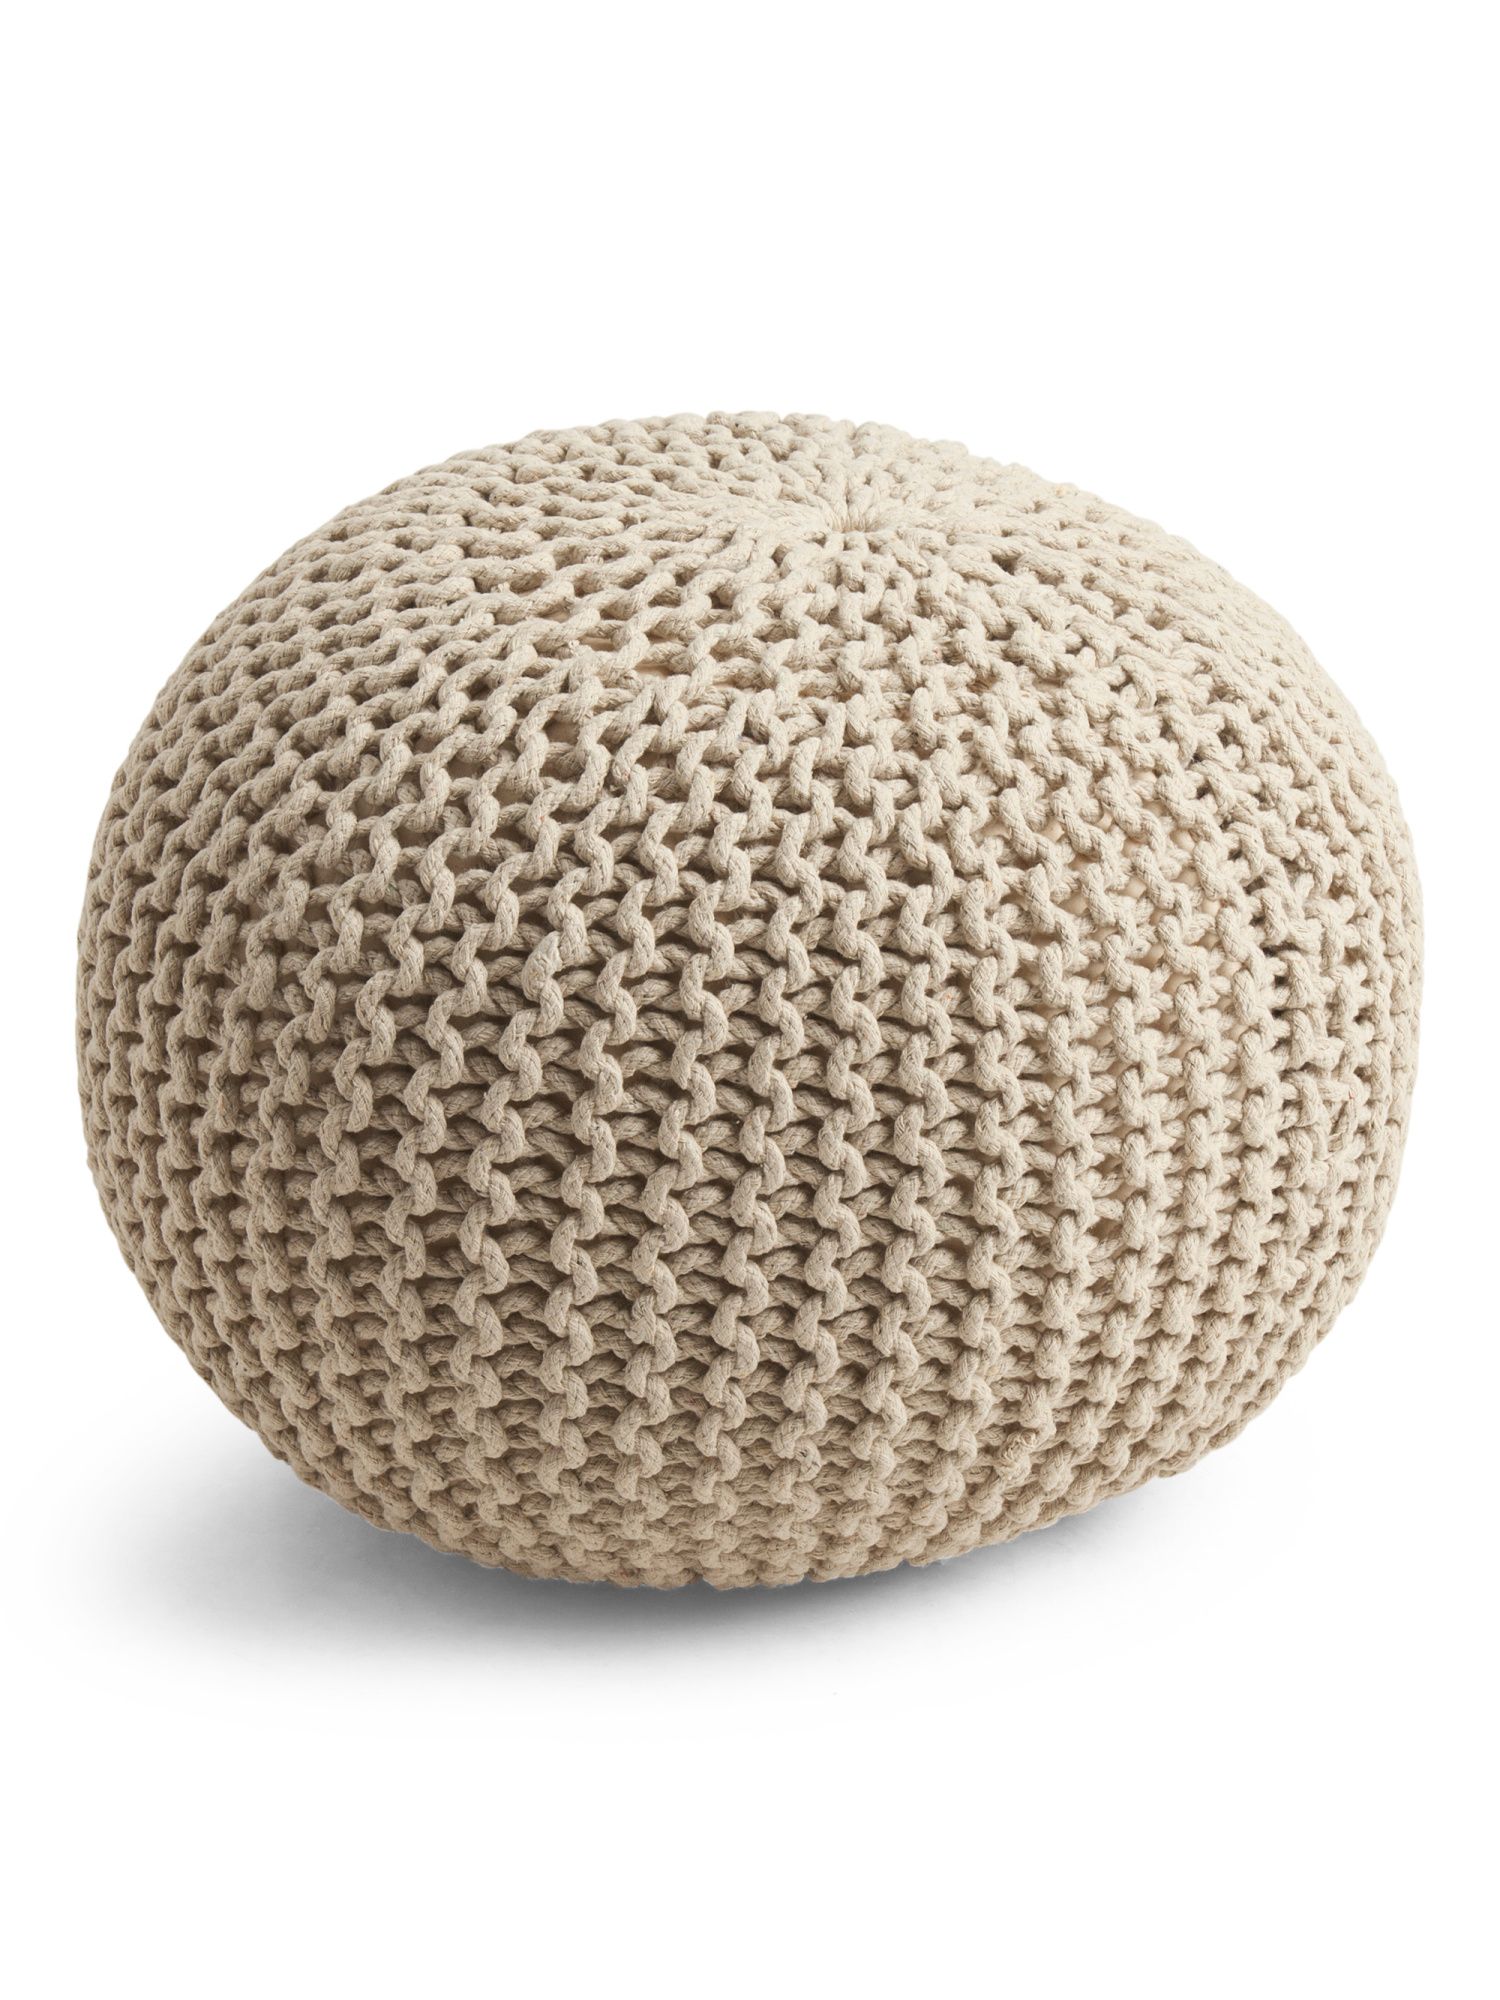 Made In India Majestic Knit Pouf | TJ Maxx